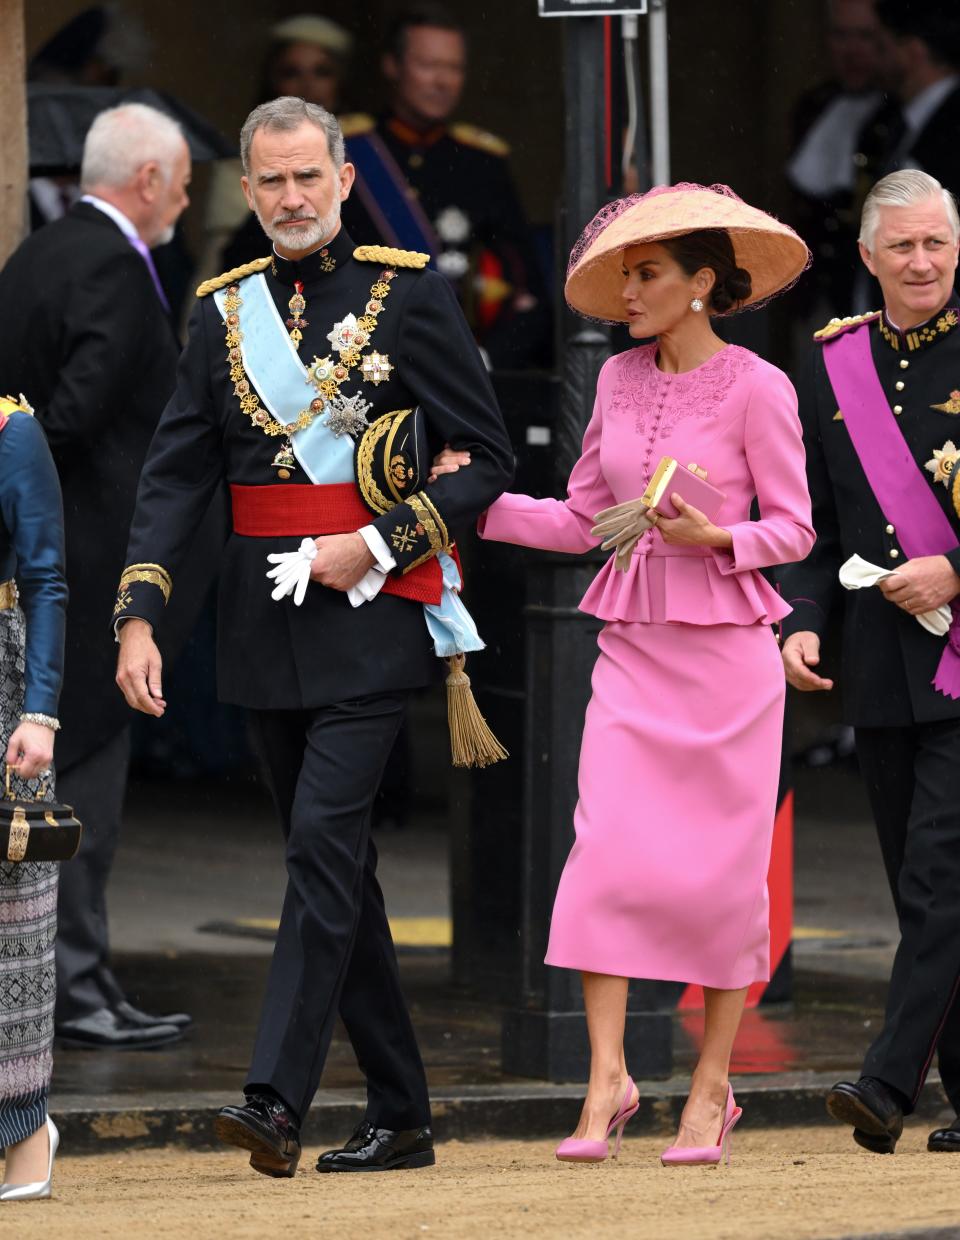 King Felipe VI and Queen Letizia of Spain arrive to attend Britain's King Charles and Queen Camilla's coronation ceremony at Westminster Abbey on May 6.